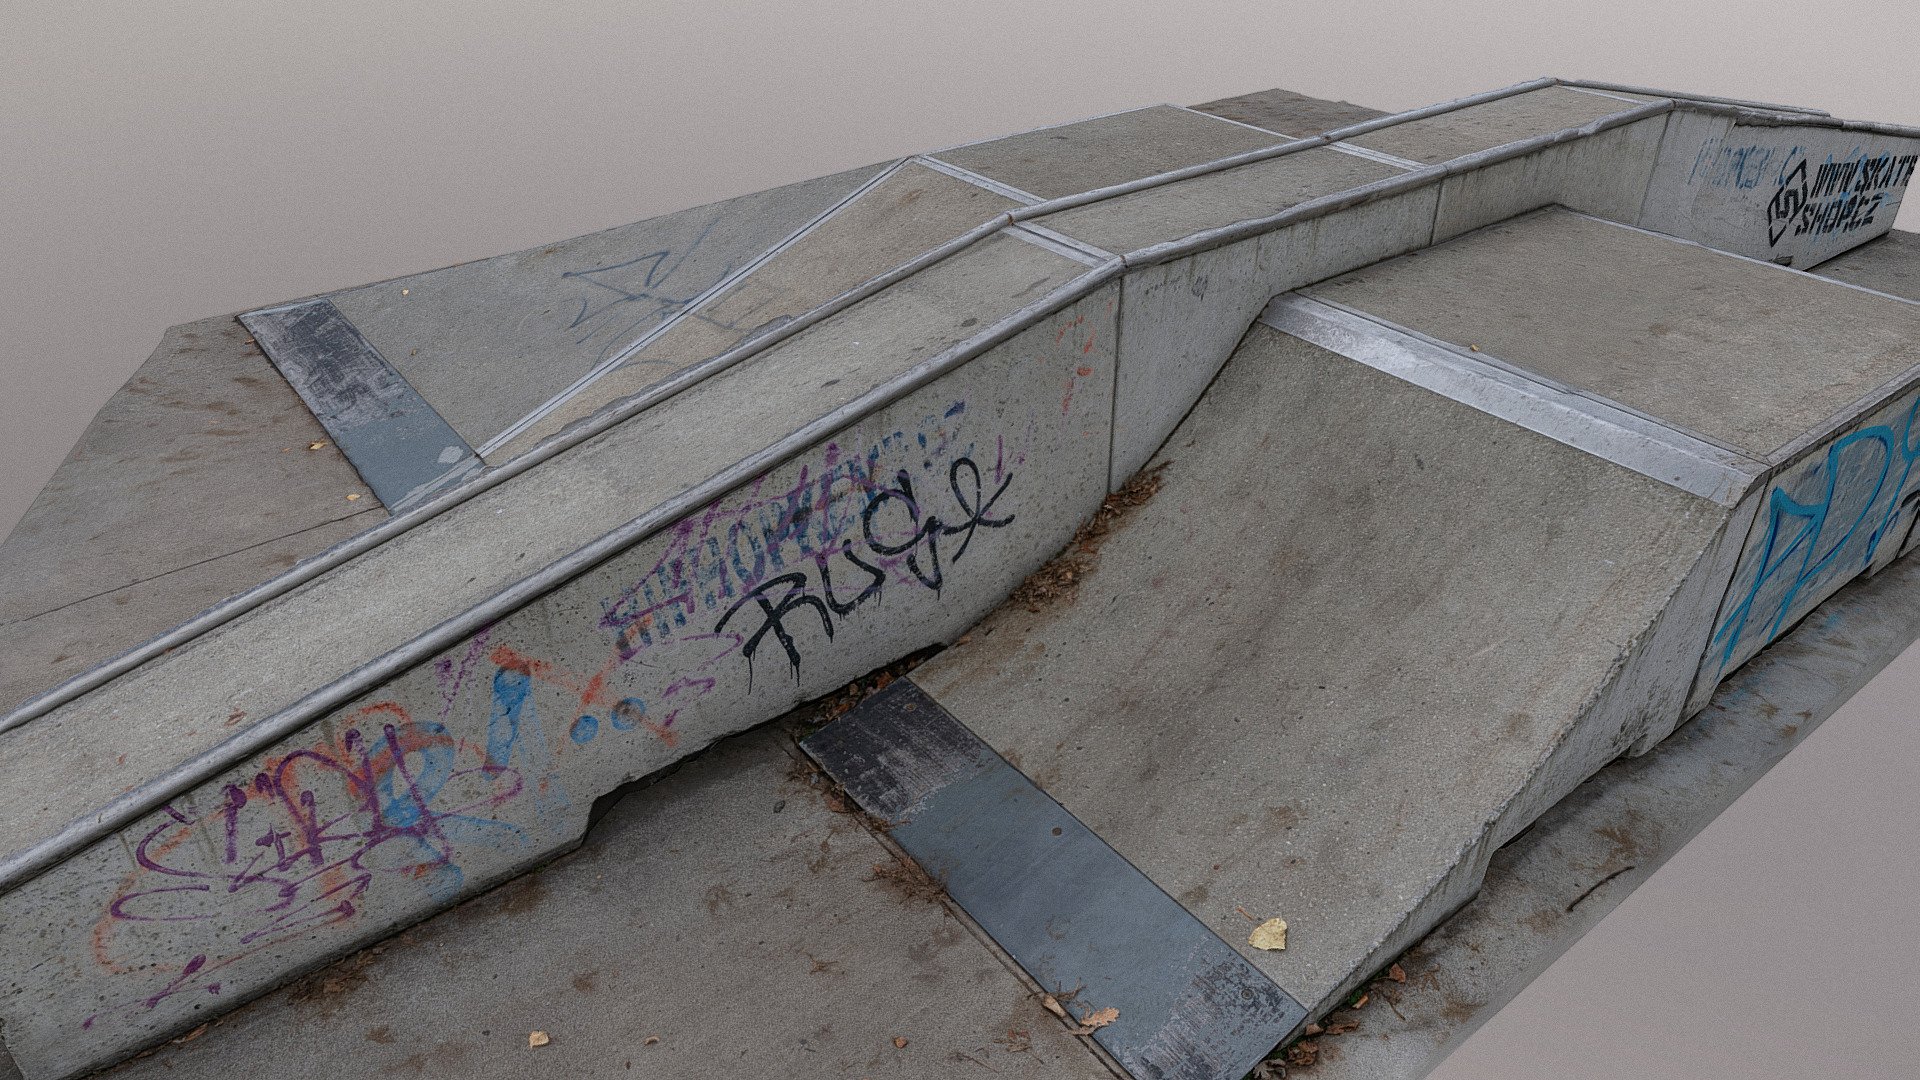 Concrete steel Skatepark ramp table top, bank, hubba, A frame, ski jump, pre fab box element with sprayed tags

Created in RealityCapture by Capturing Reality

photogrammetry scan (150x24mp), 2x16k textures - Skatepark - Download Free 3D model by matousekfoto 3d model